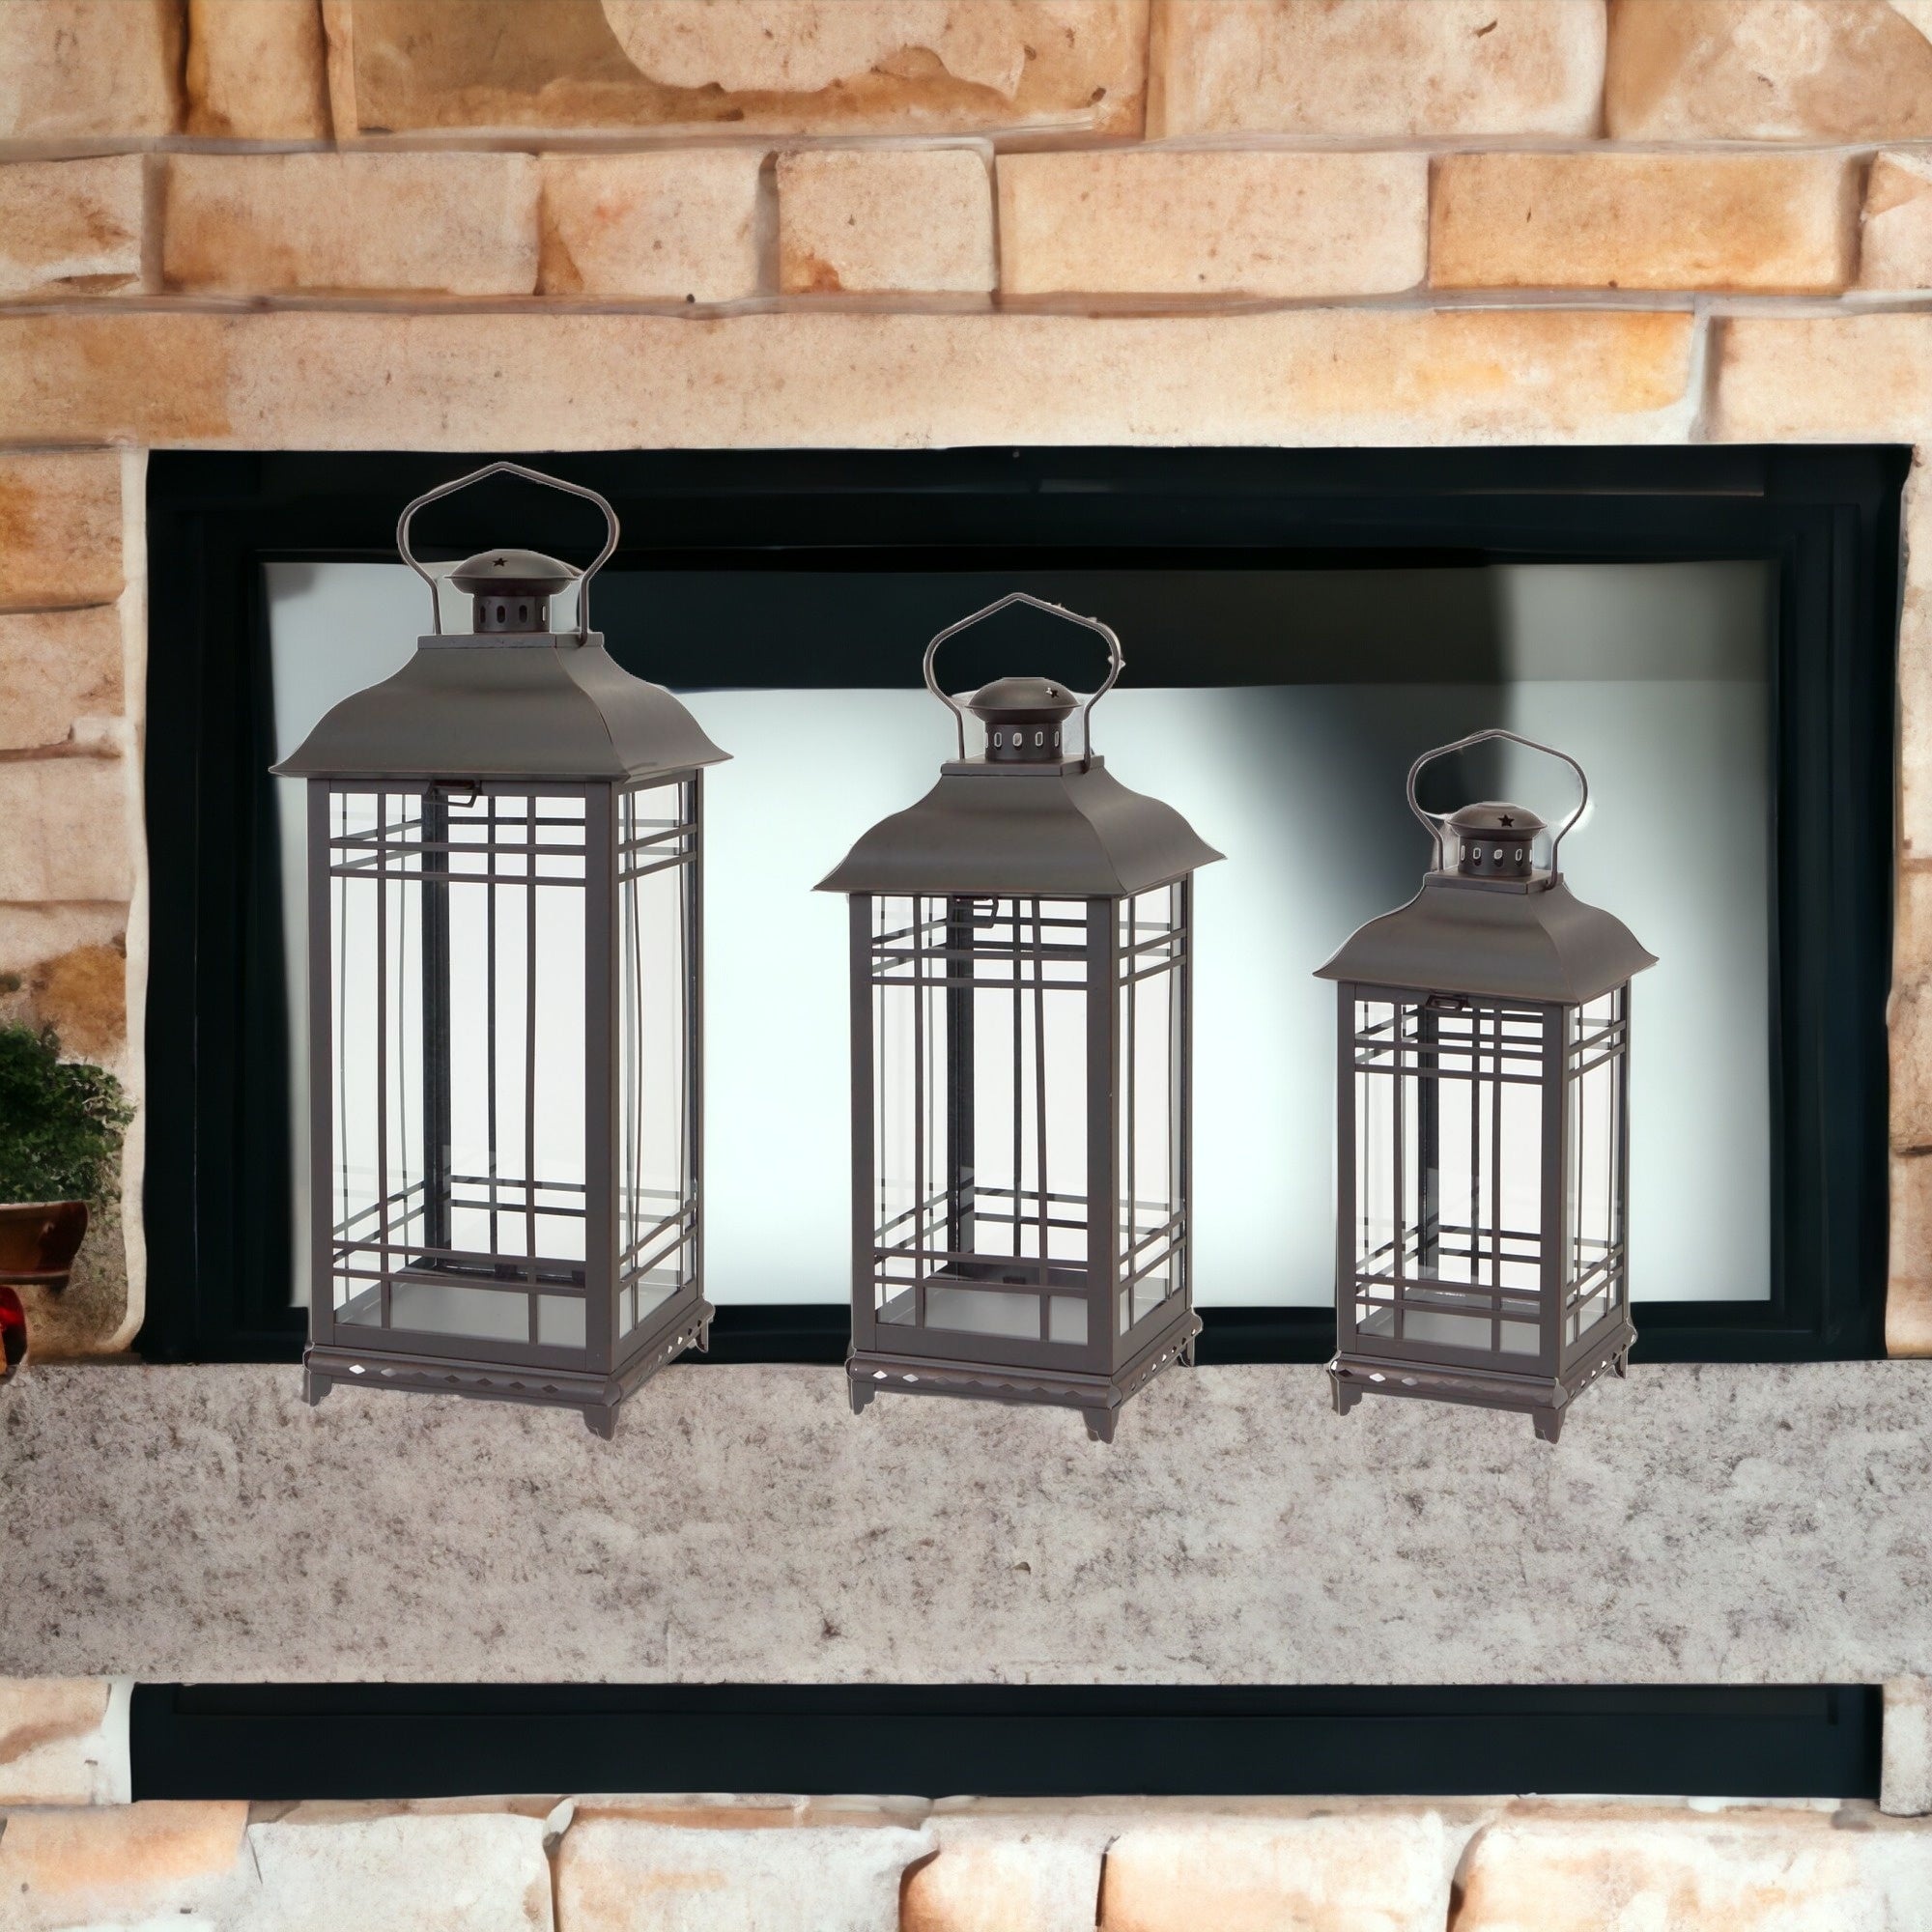 Set Of Three Black Flameless Floor Lantern Candle Holder - Tuesday Morning-Candle Holders